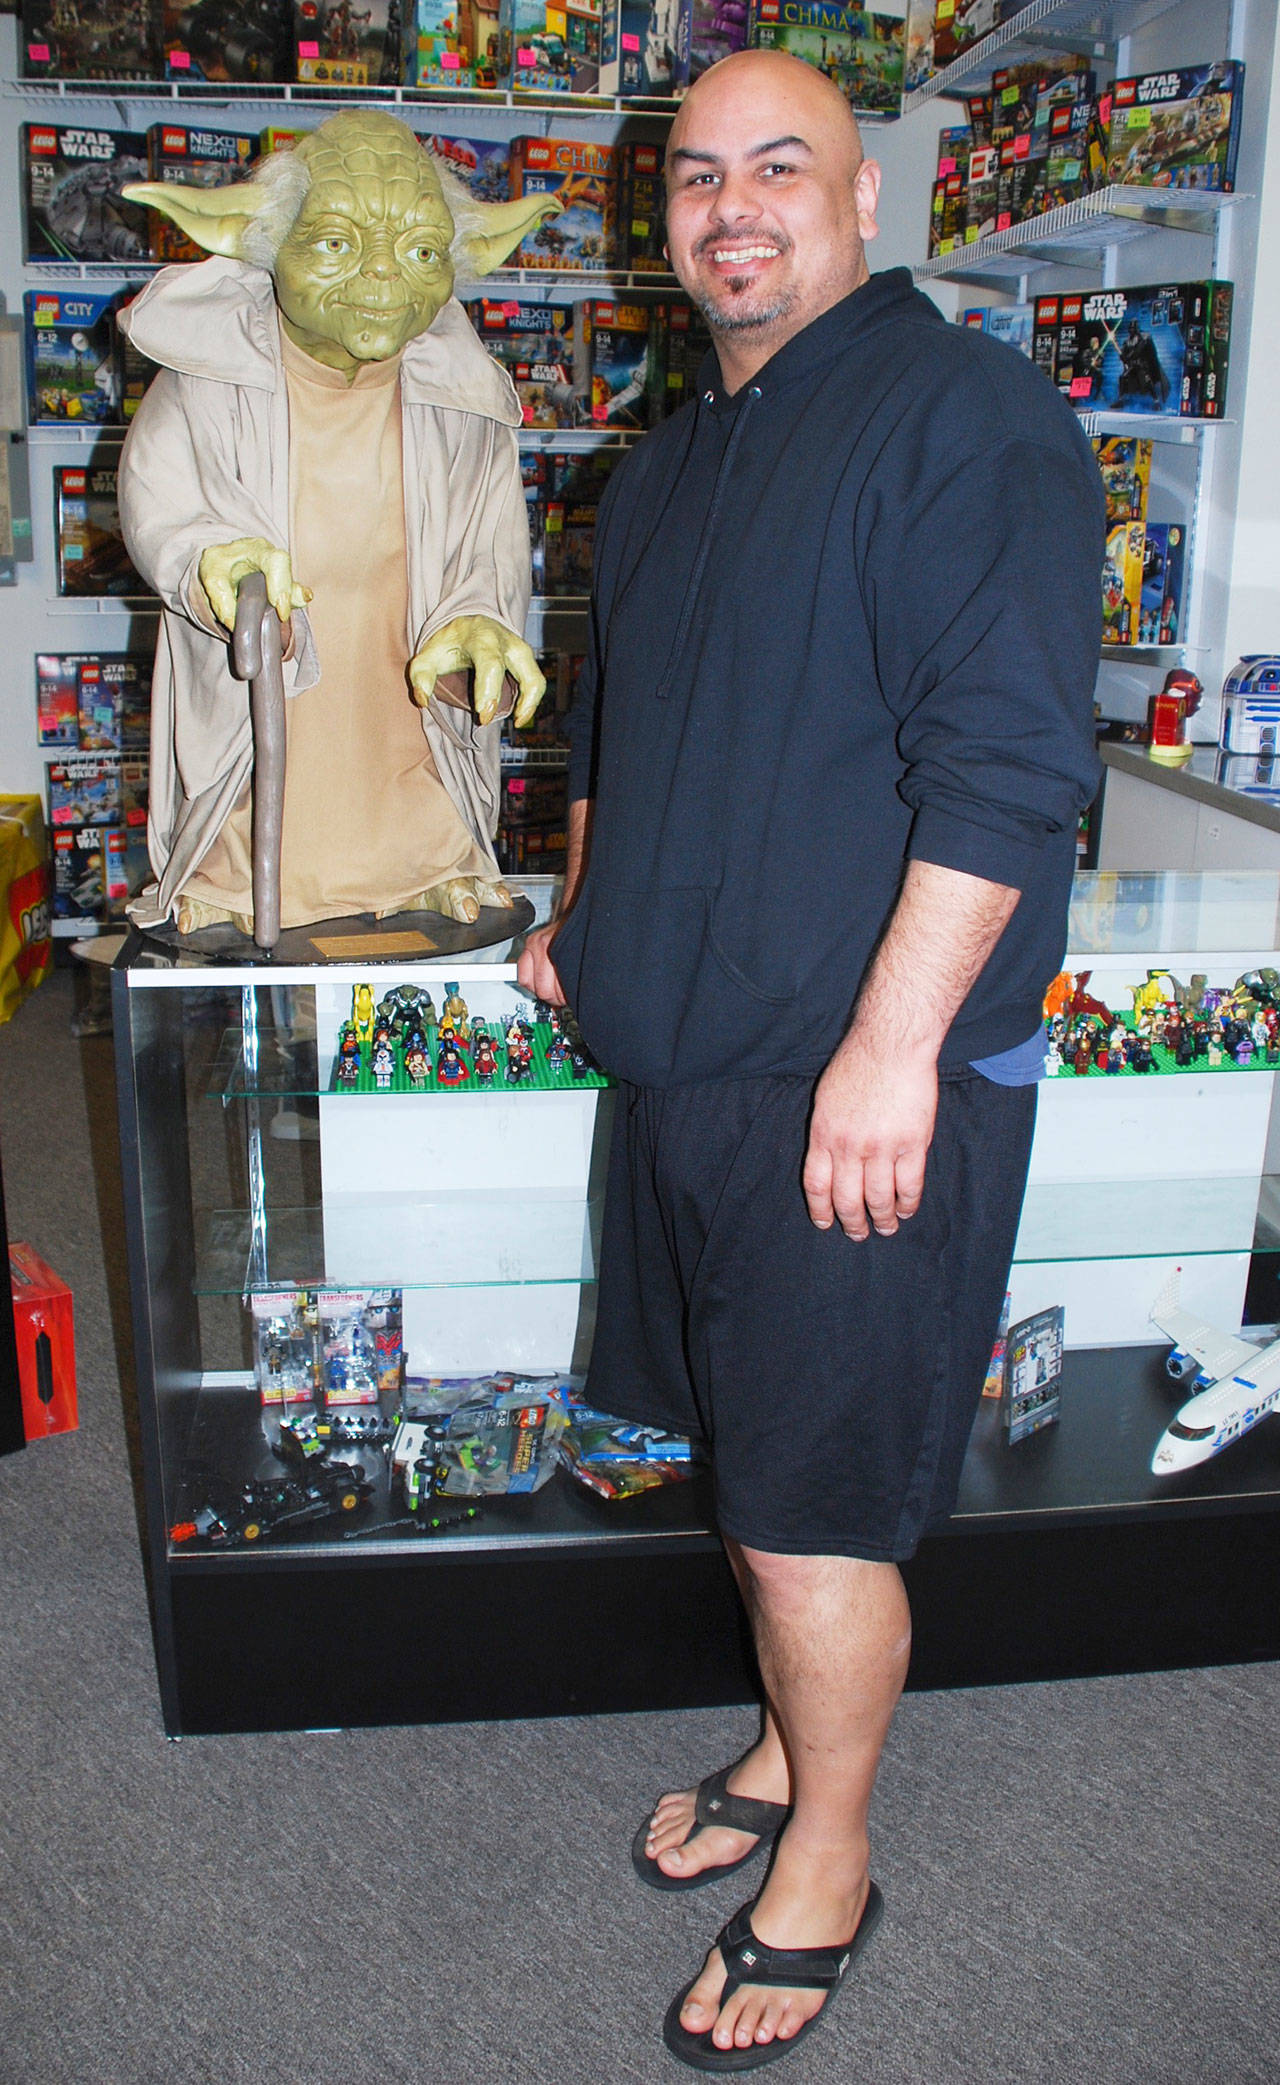 Ben Ramirez says his gaming and collectibles store in Port Orchard has a little bit of everything from popular culture in the ‘80s. Photo credit: Bob Smith | Kitsap Daily News